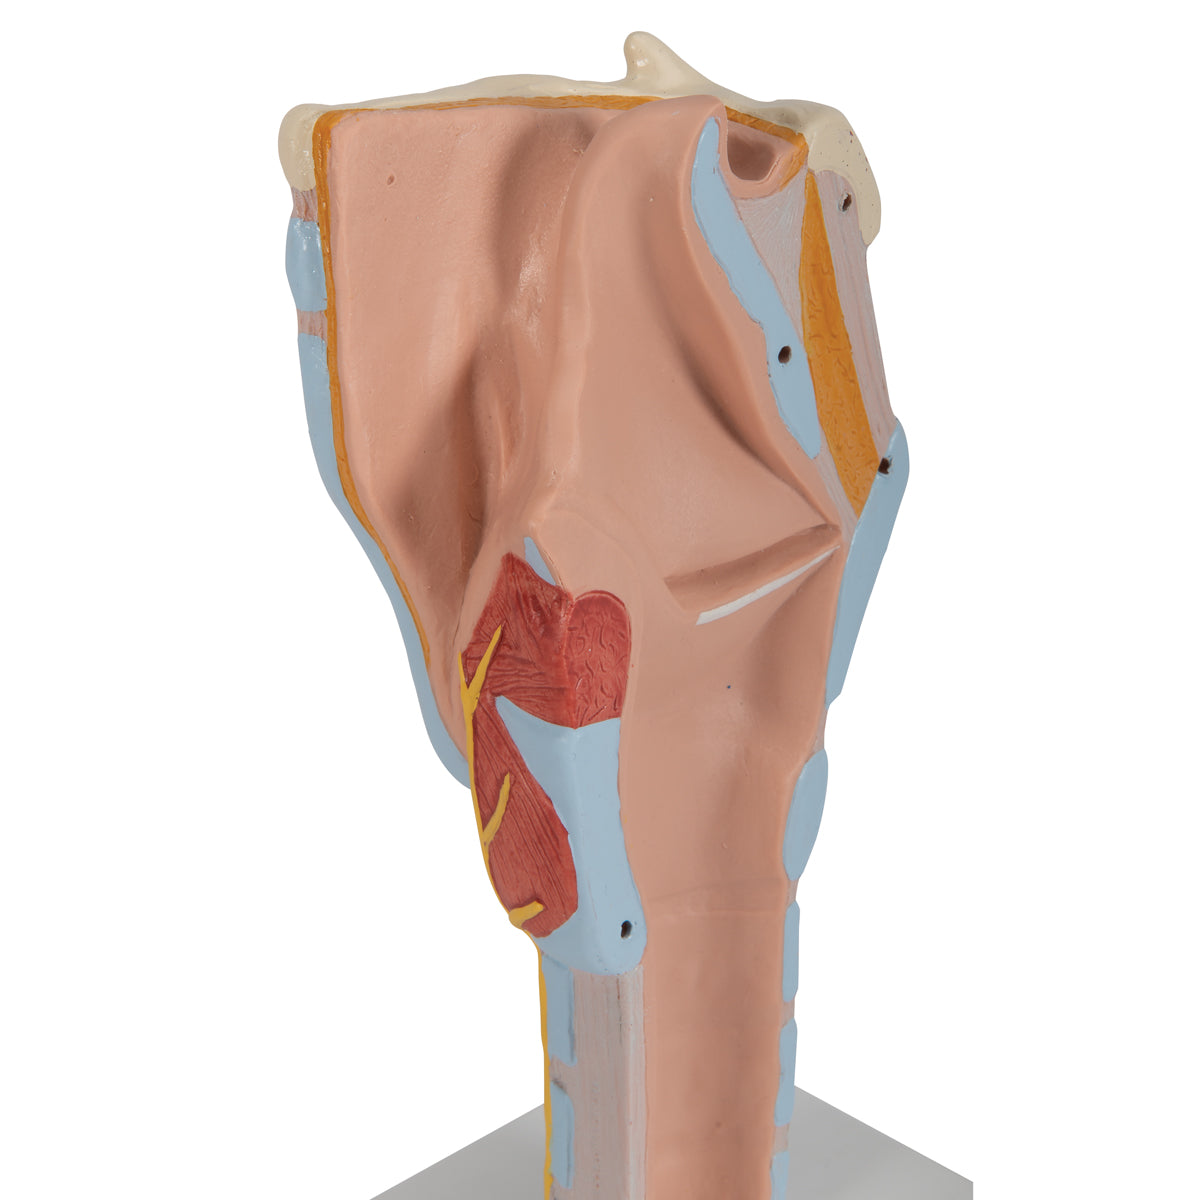 Enlarged larynx model with vocal folds and several other tissues. Can be separated into 7 parts